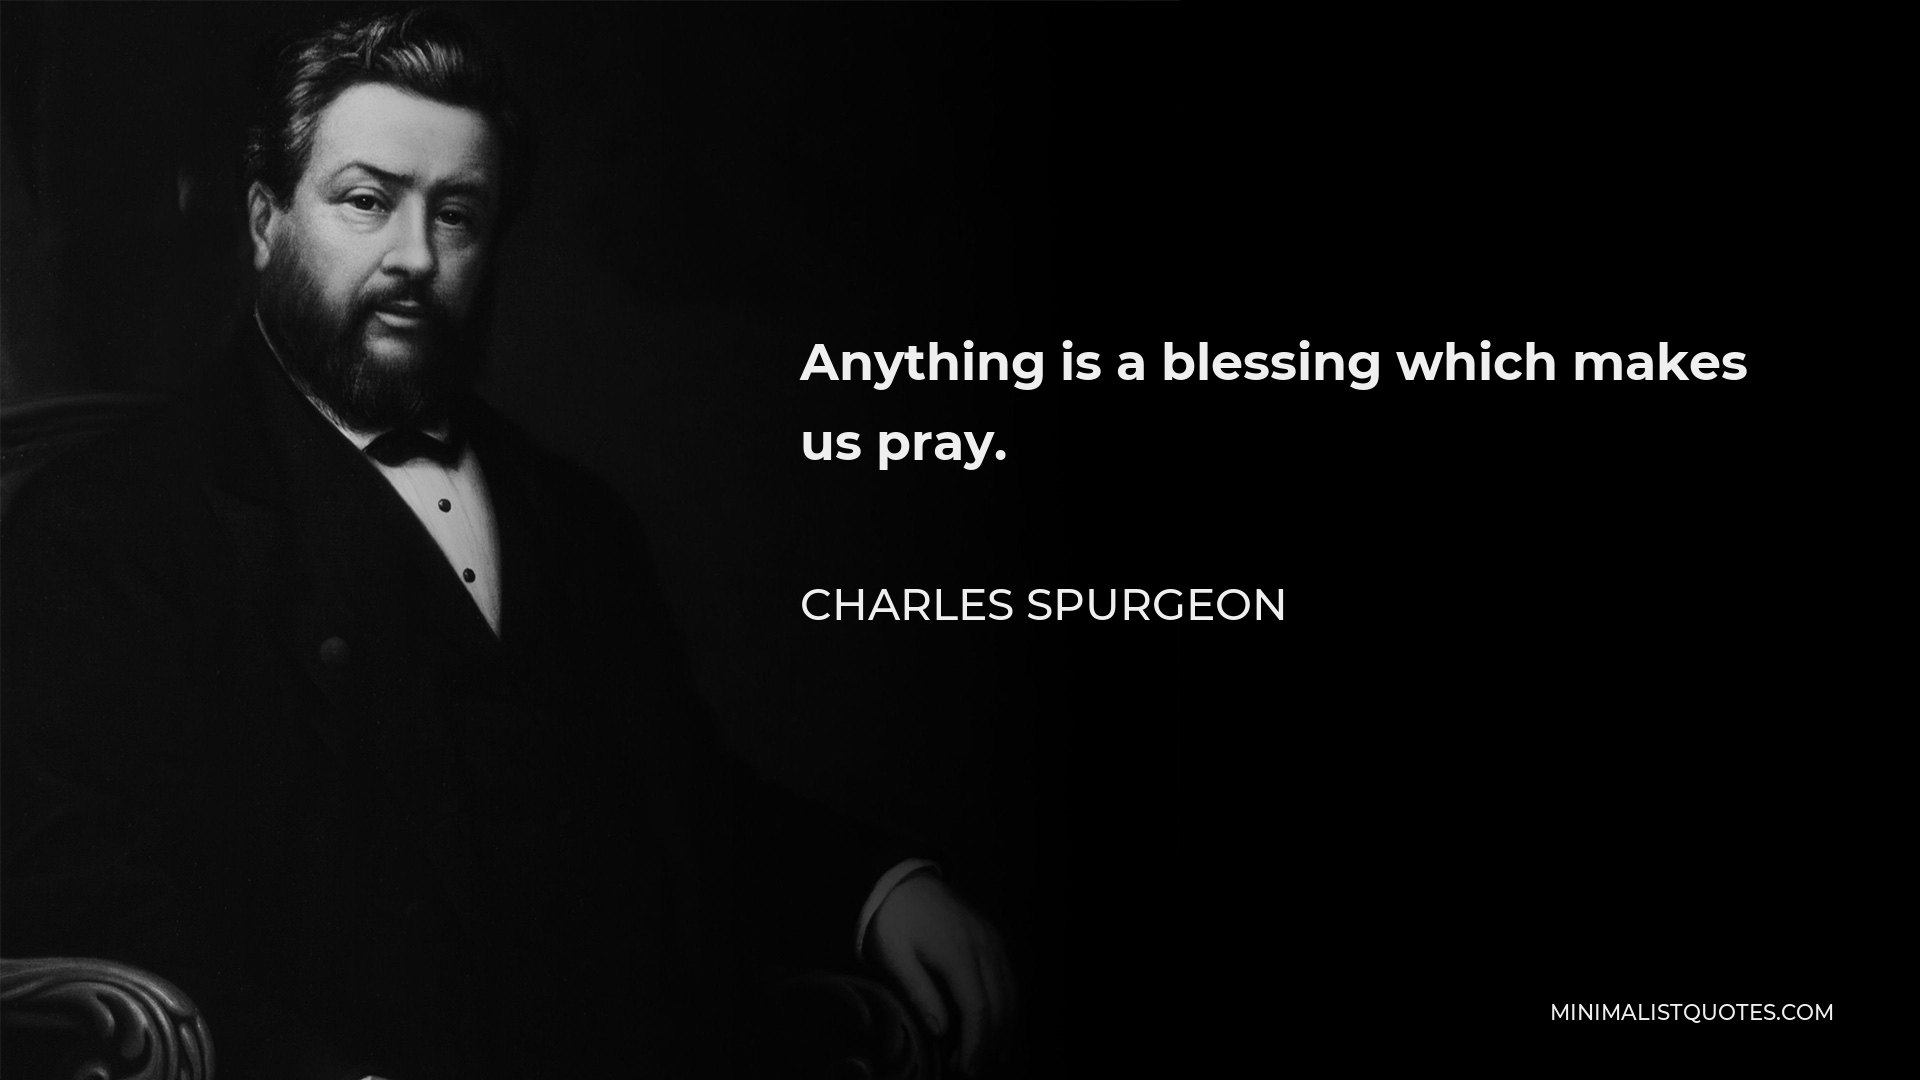 Charles Spurgeon Quote - Anything is a blessing which makes us pray.